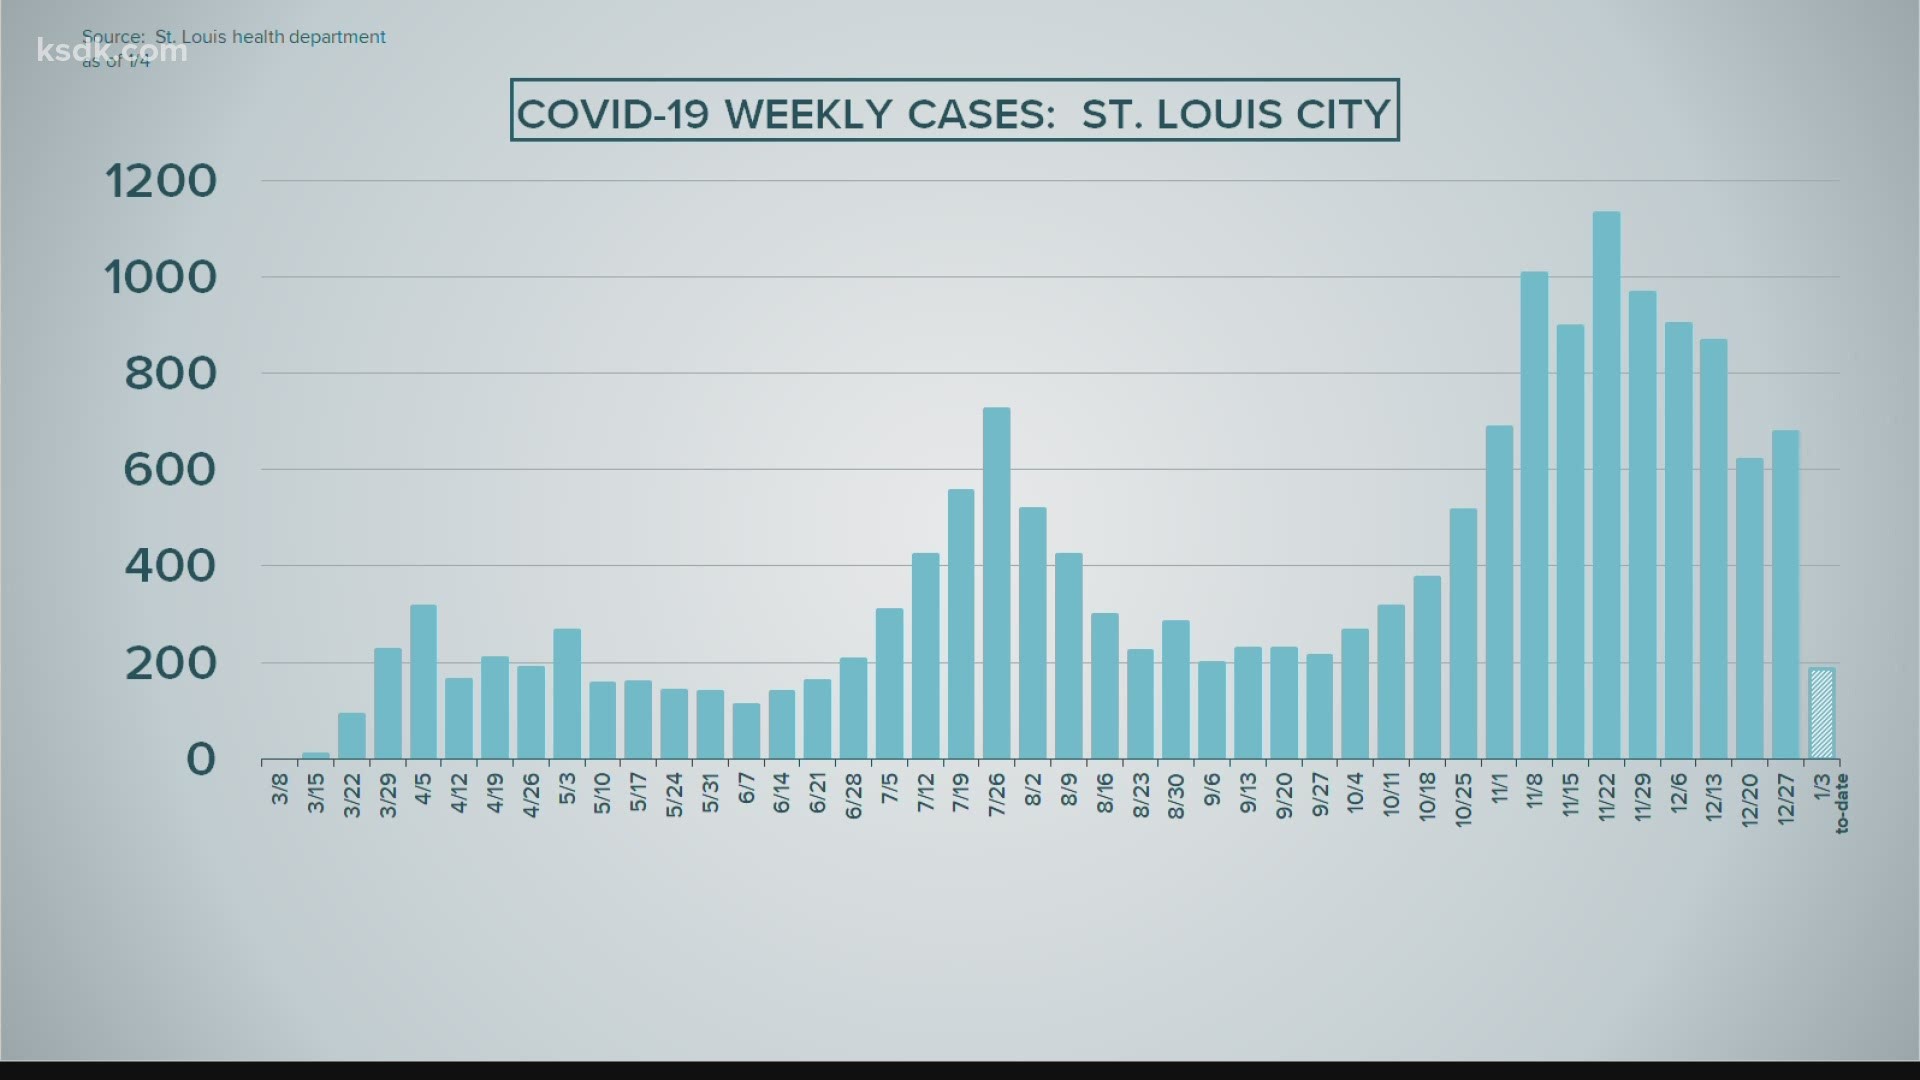 New confirmed cases were down the week of December 20, and then popped back up the week of December 27. That was a 20 percent increase.